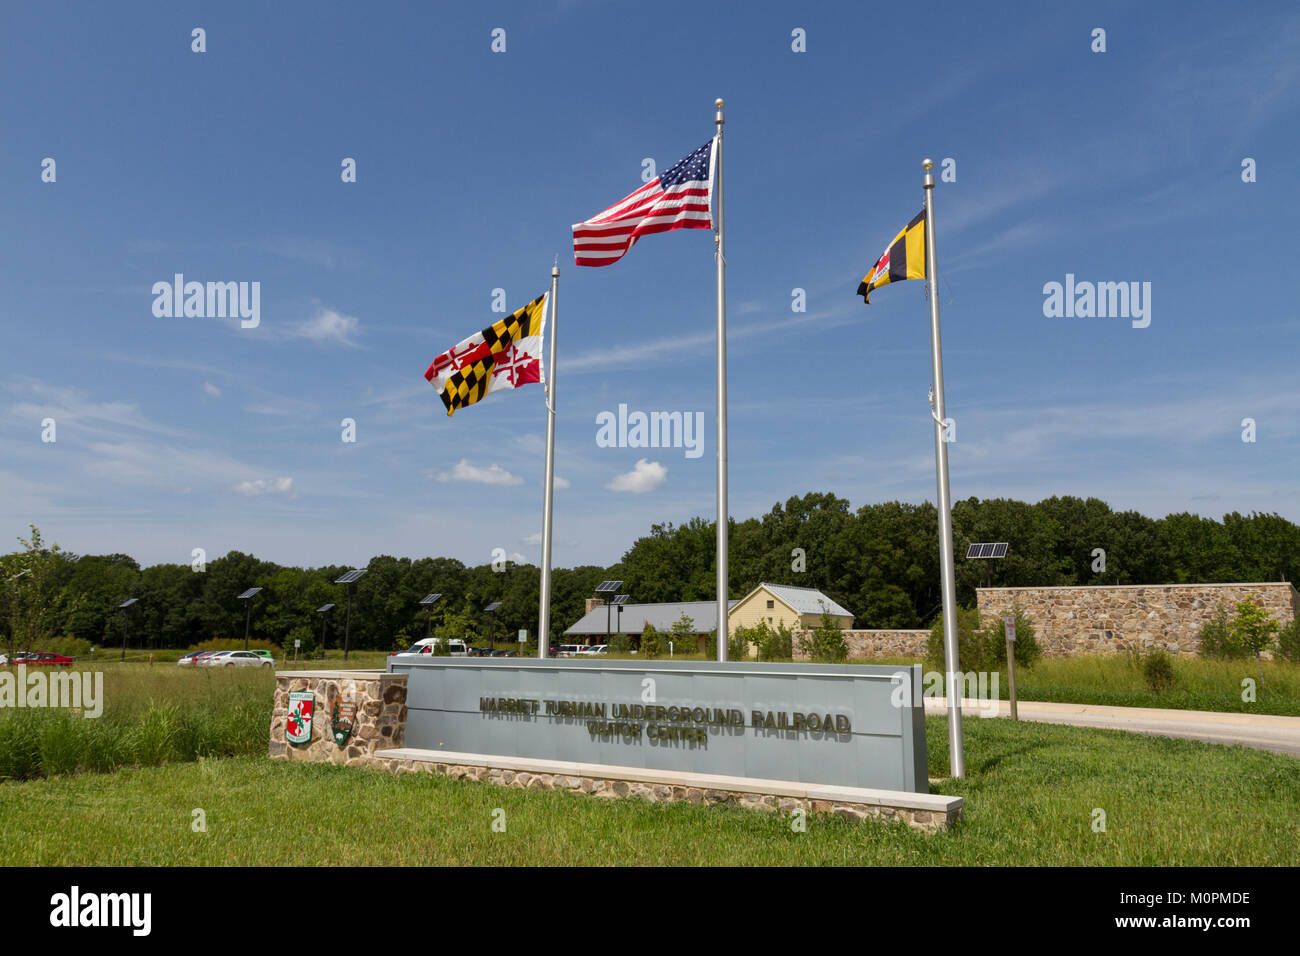 Flags outside the entrance to the Harriet Tubman Underground Railroad Visitor Center, Church Creek, Maryland, United States. Stock Photo